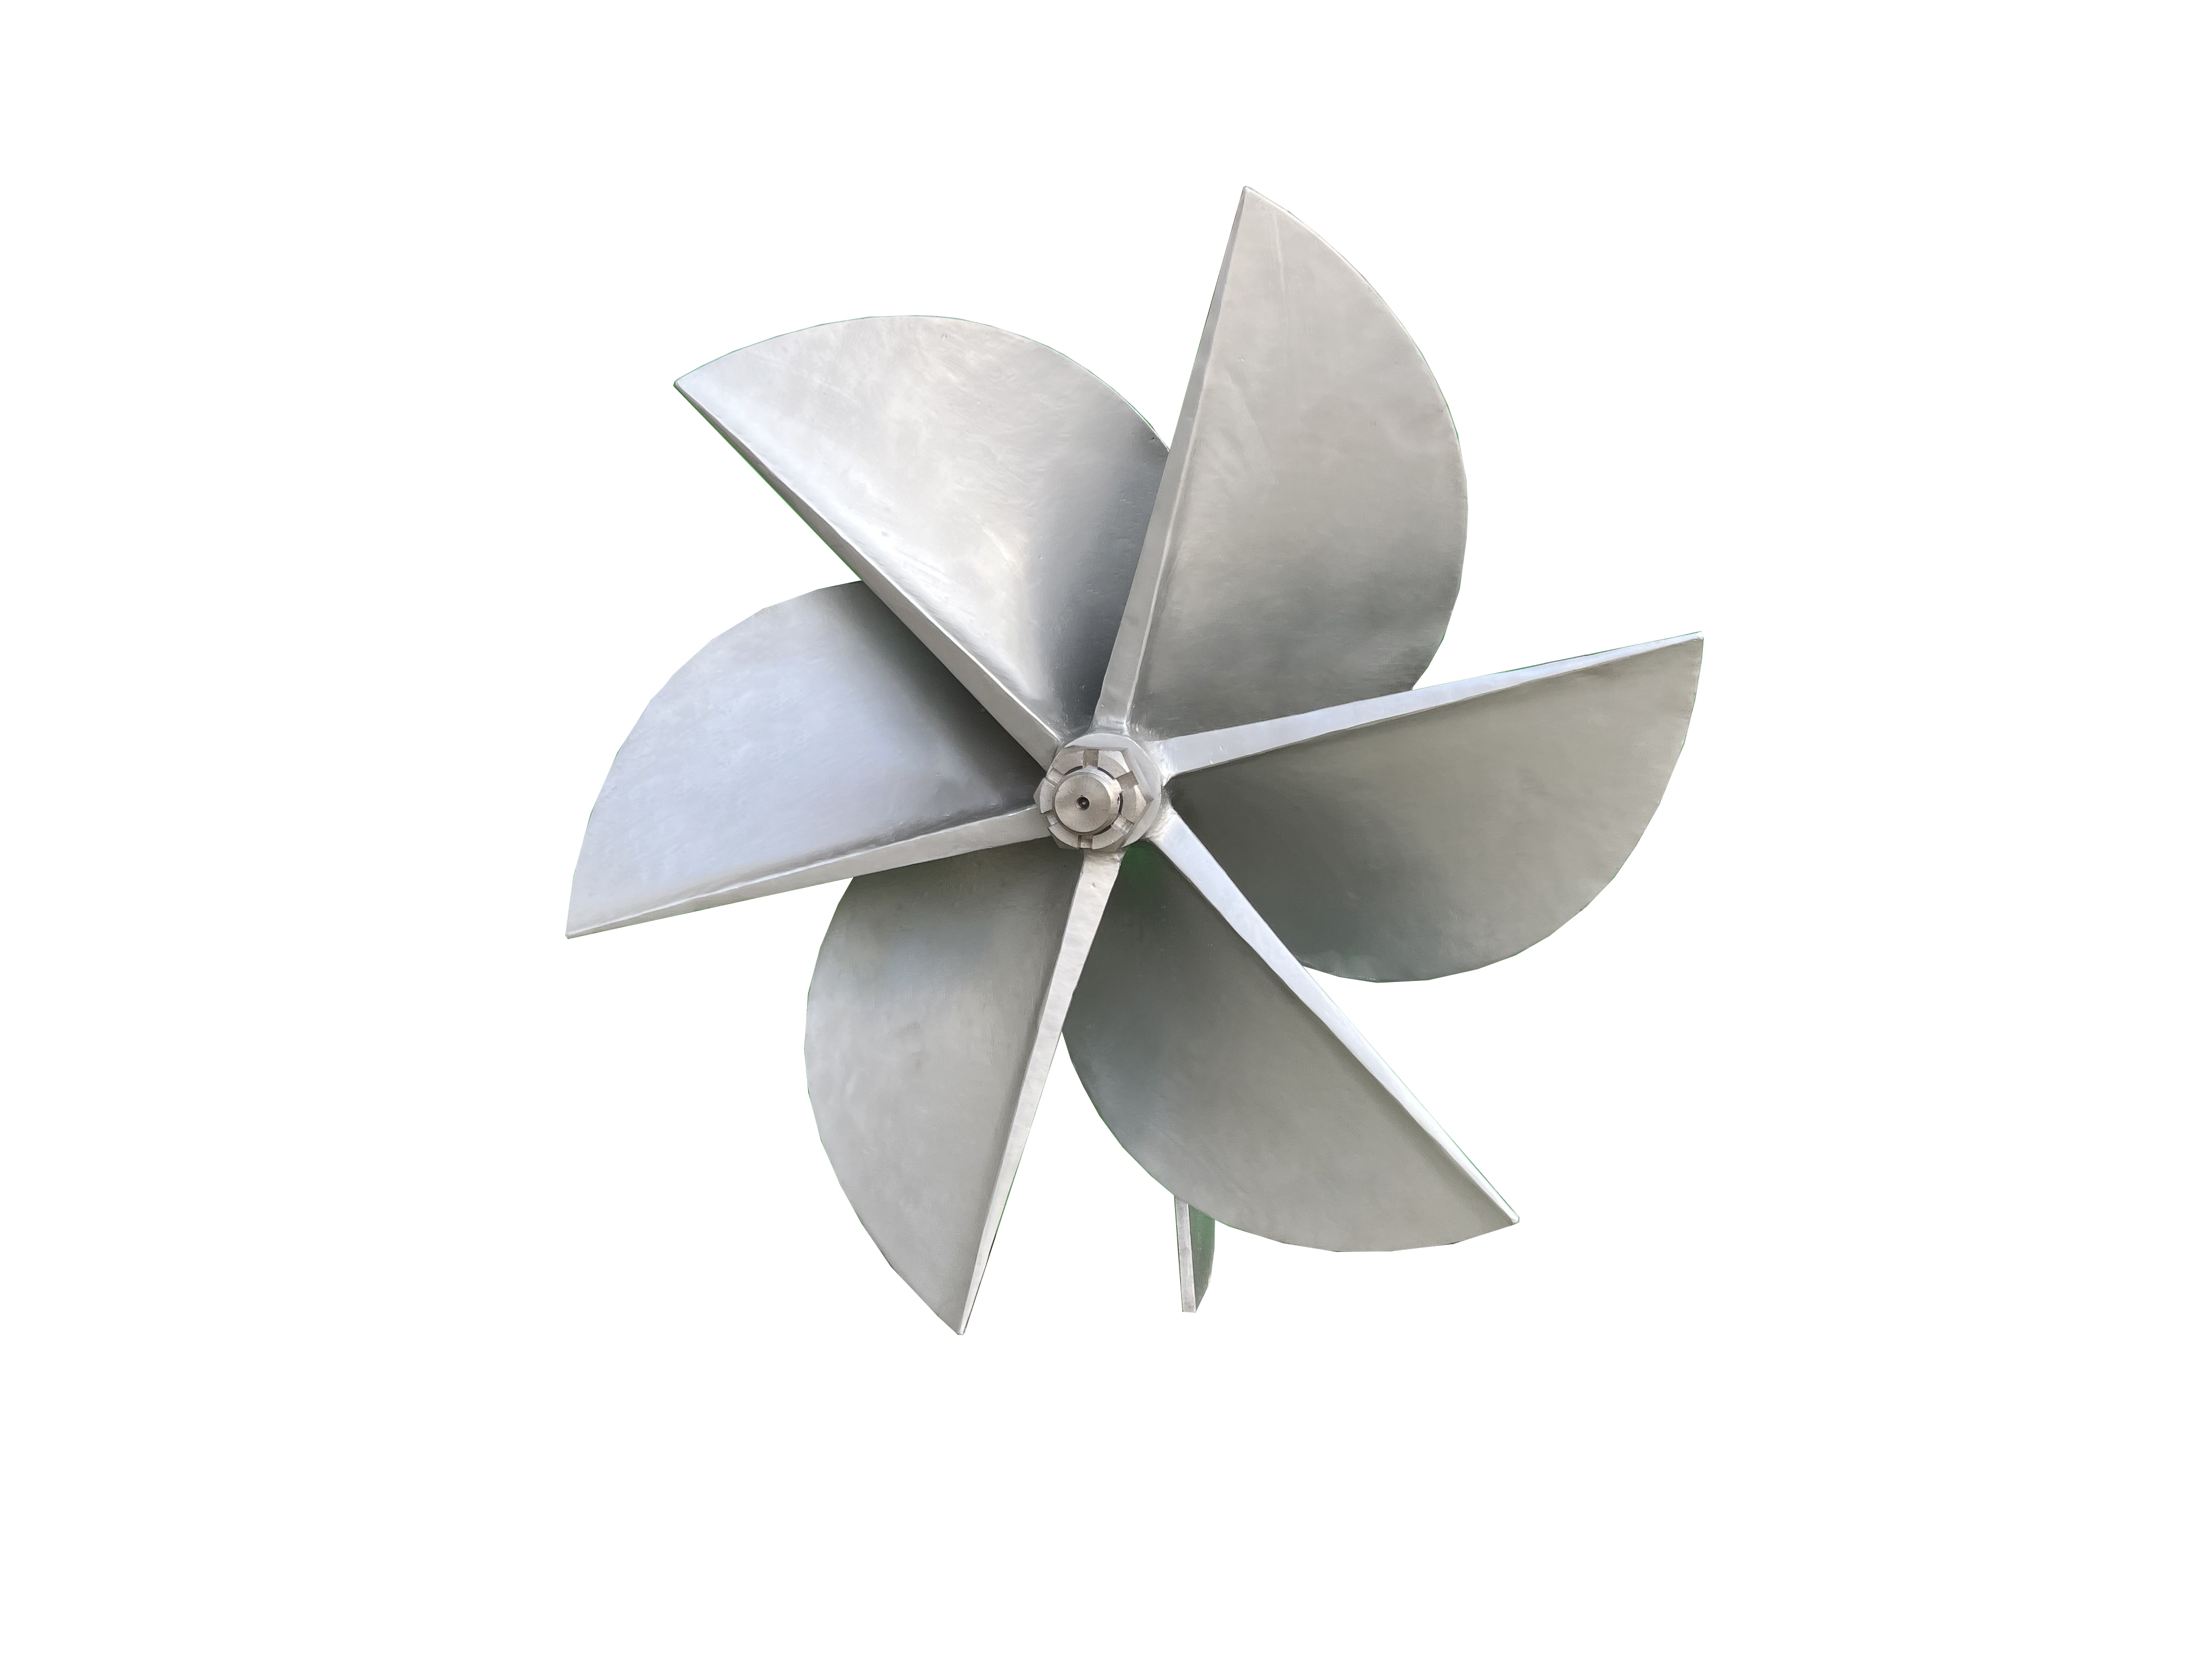 BH750 surface drive propeller